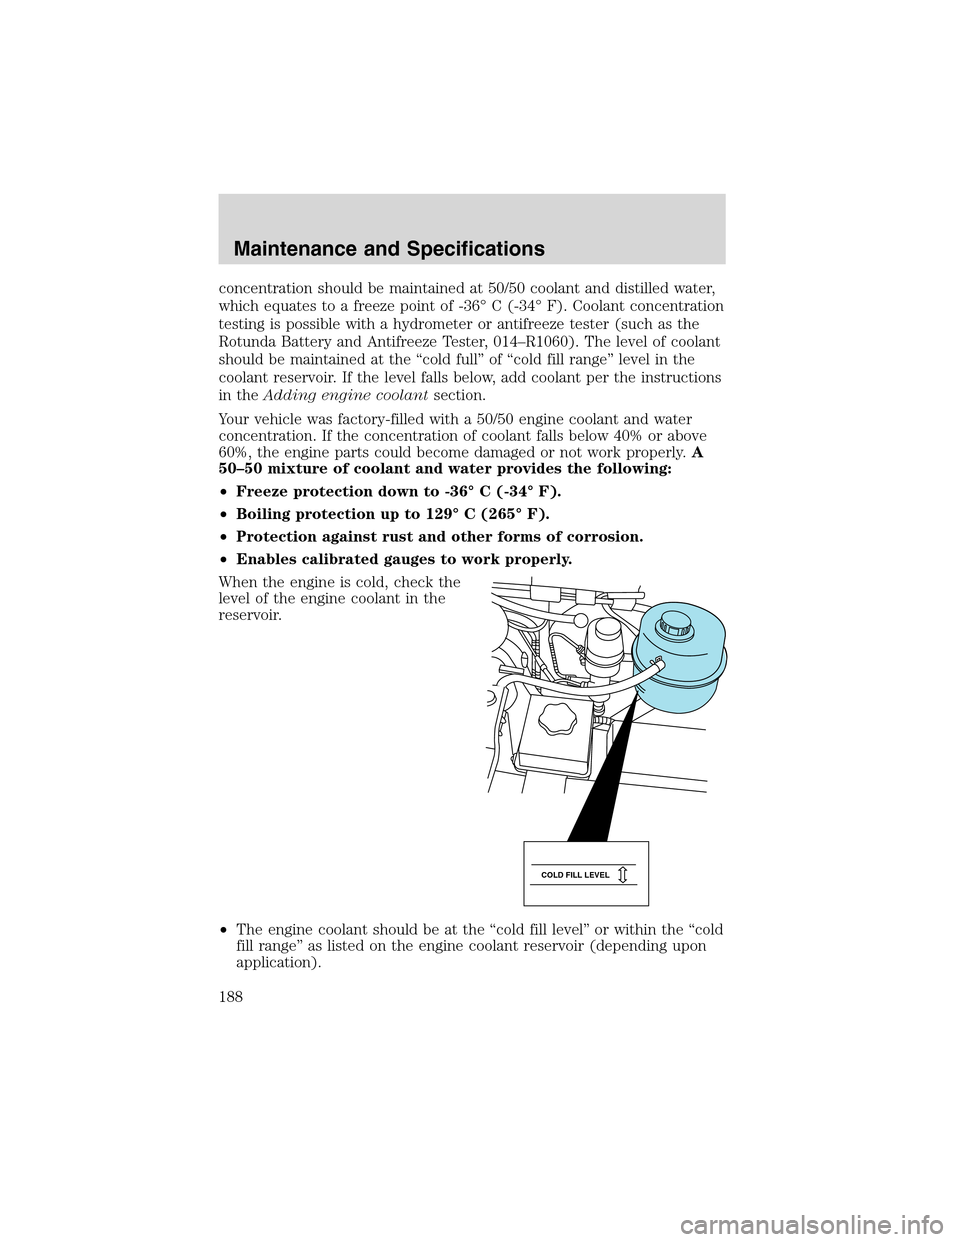 FORD E SERIES 2003 4.G Owners Manual concentration should be maintained at 50/50 coolant and distilled water,
which equates to a freeze point of -36°C (-34°F). Coolant concentration
testing is possible with a hydrometer or antifreeze t